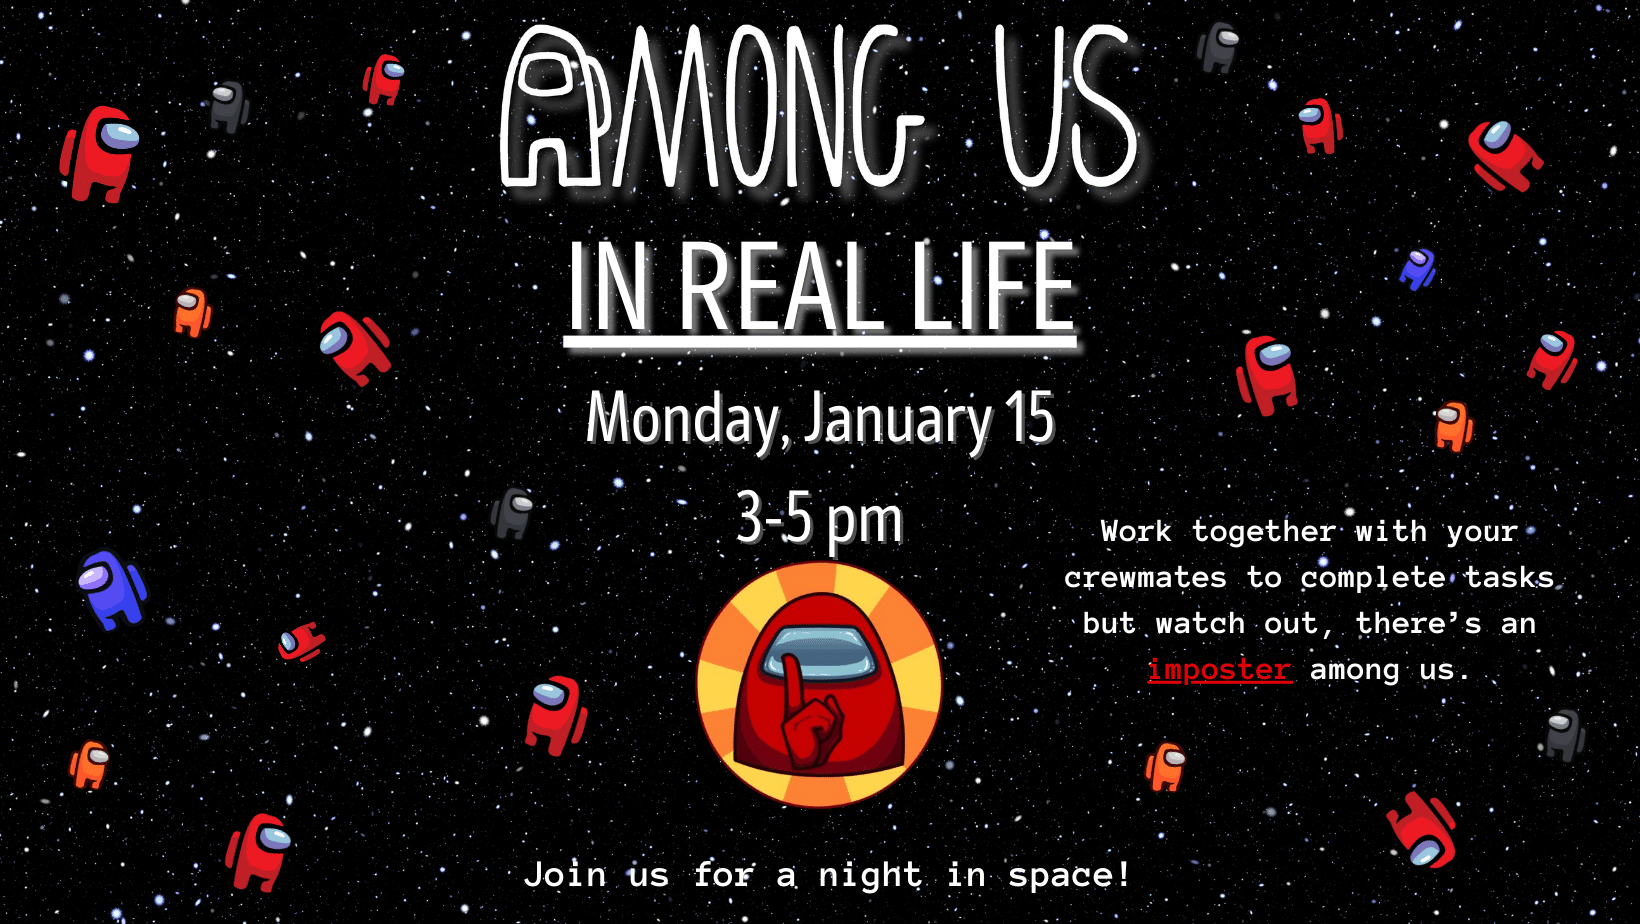 Among Us in Real Life, Monday, January 15 at 3:00 pm. For kids ages 10-17